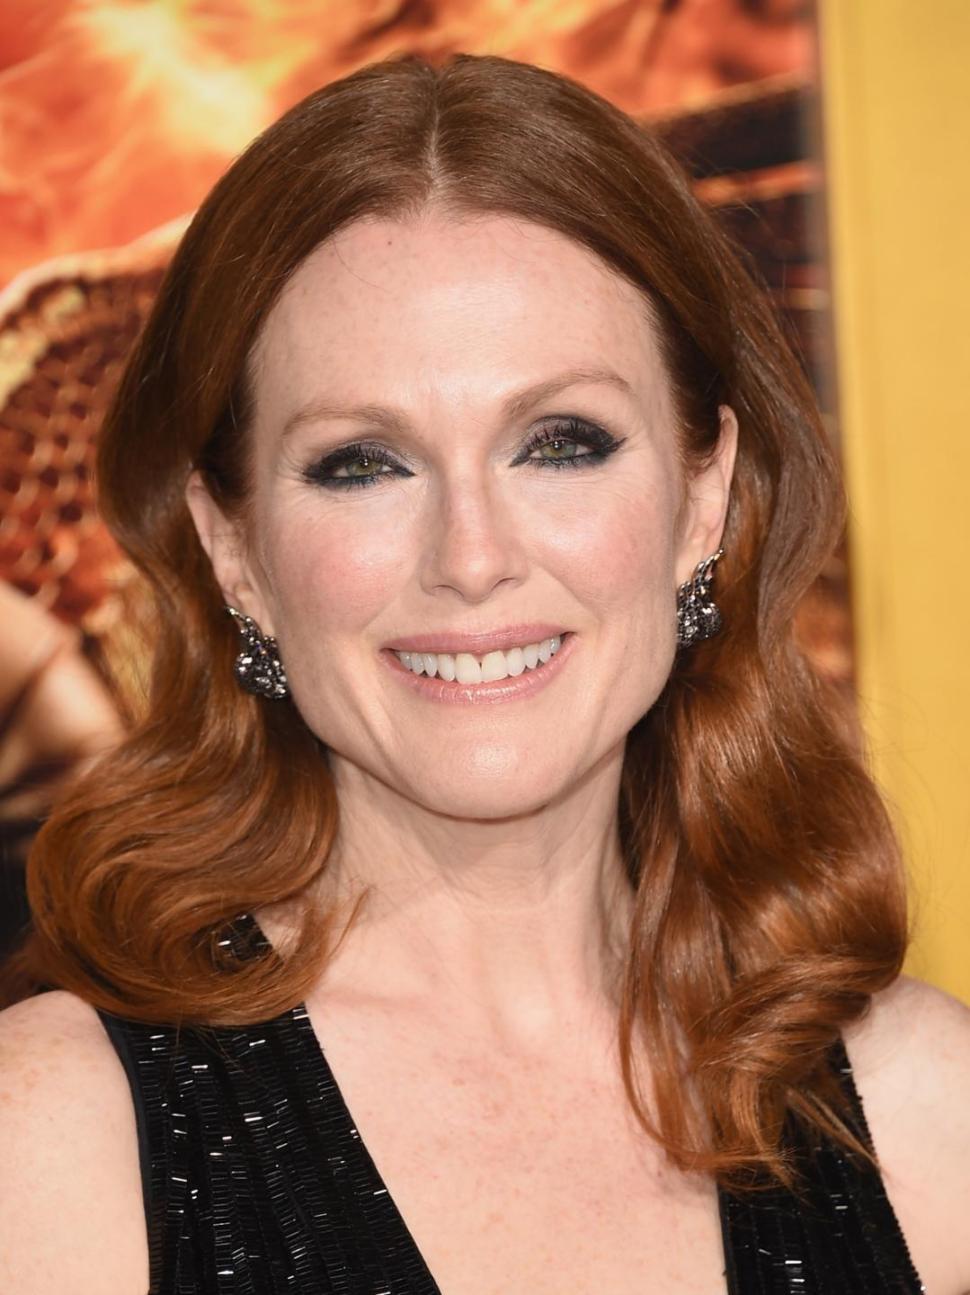 Julianne Moore is a "total perfectionist" when it comes to her scenes, director Wash Westmoreland tells Confidenti@l. 